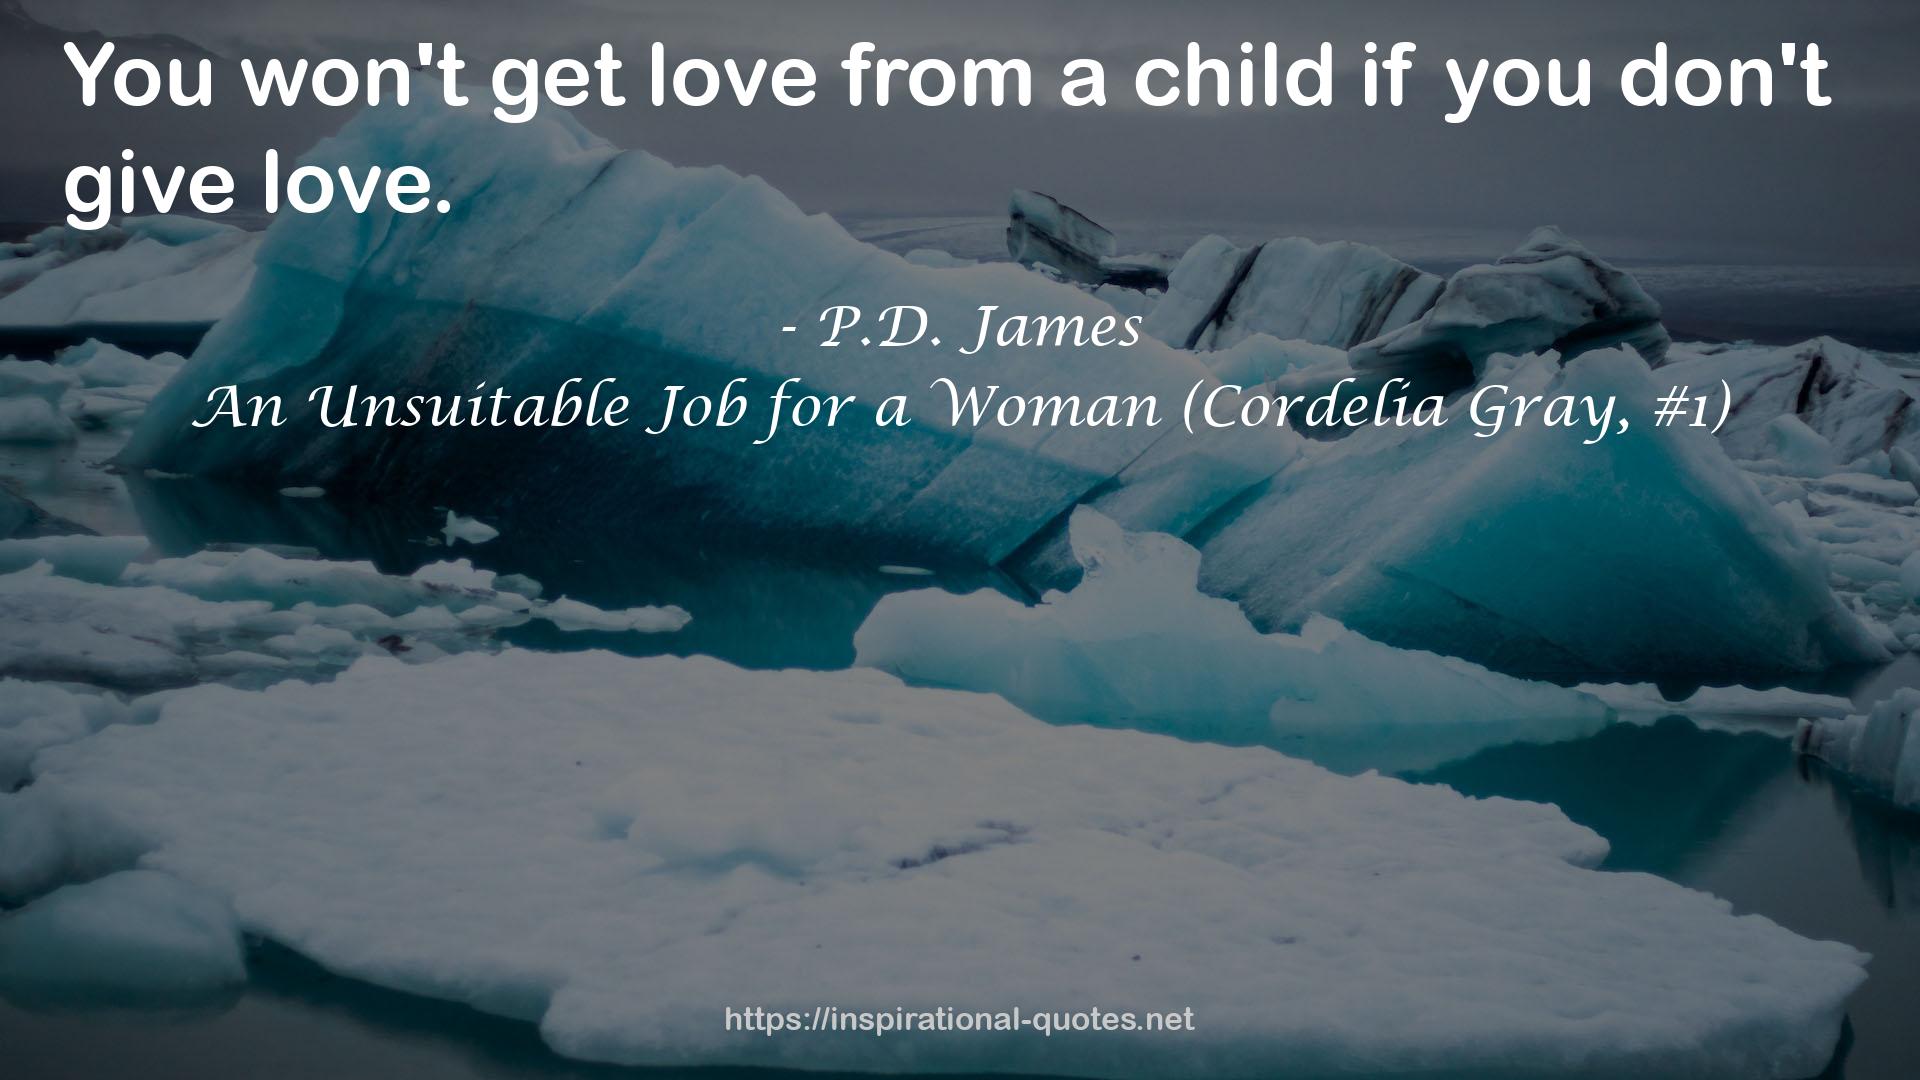 An Unsuitable Job for a Woman (Cordelia Gray, #1) QUOTES